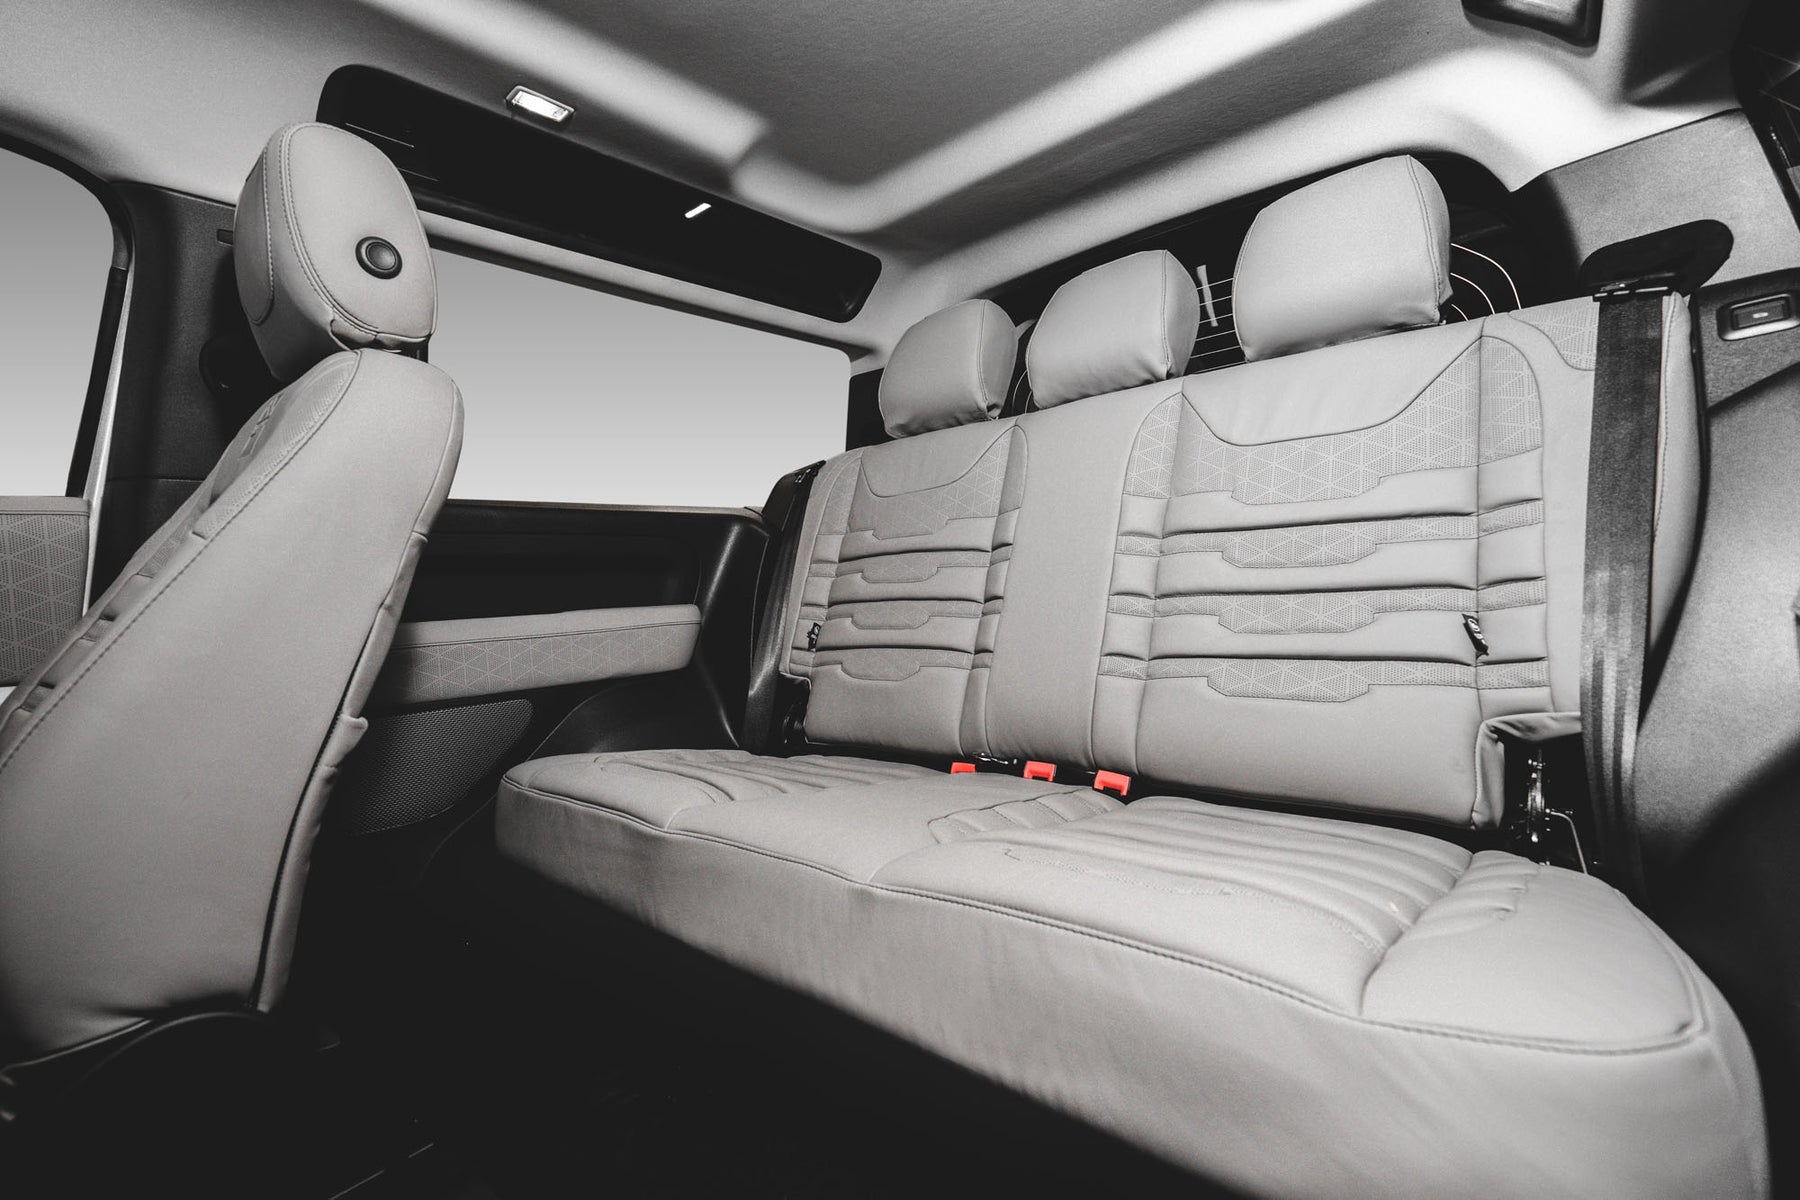 New Land Rover Defender rear seat conversion – Sterling Automotive